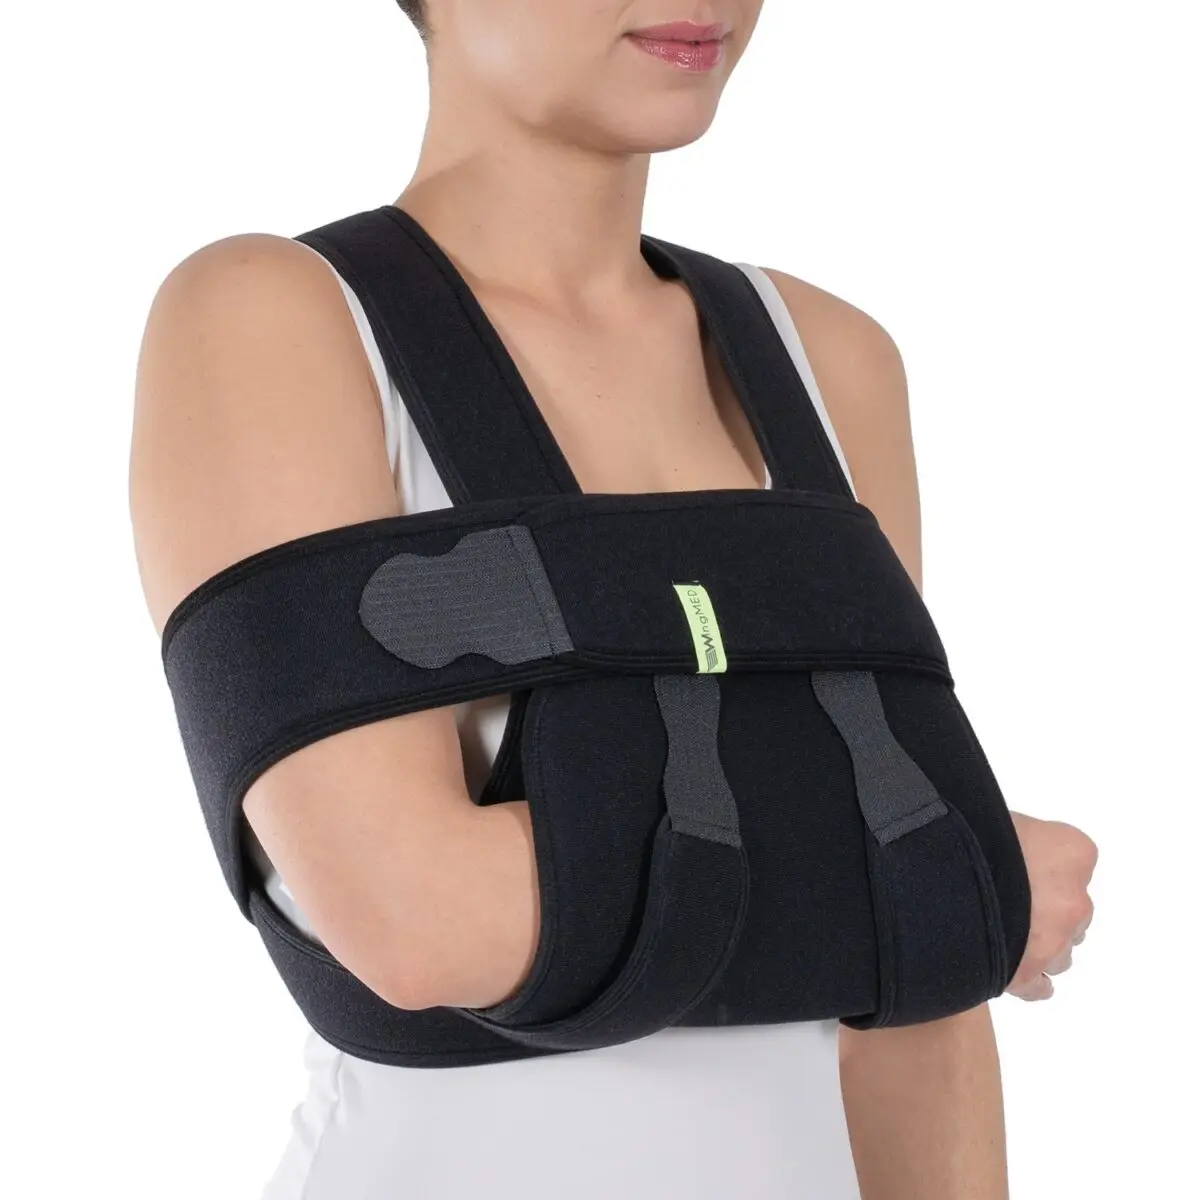 Robe if you can Specialty Velpeau Bandage | Wingmed Orthopedic Equipments